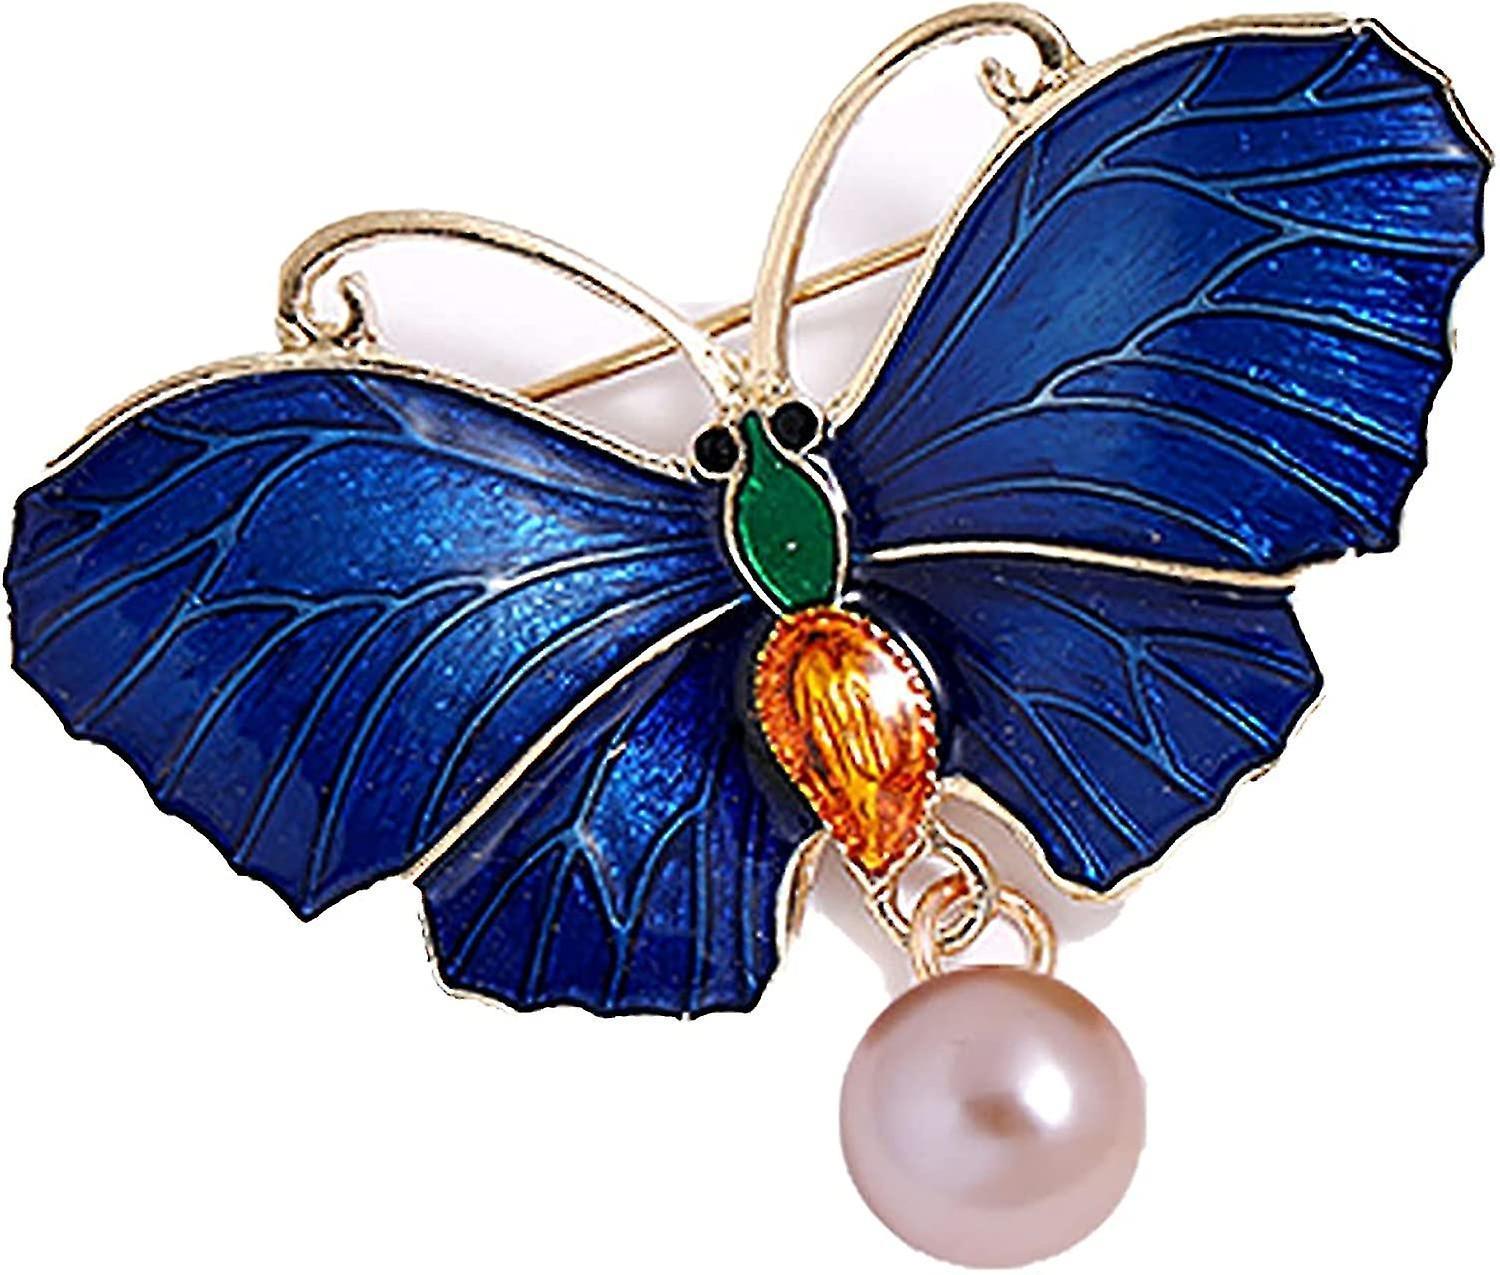 Costume Jewelry For Women Flower Brooch Pins For Women Fashion Crystal Broches Vintage Jewelry Broche Pins (butterfly B)